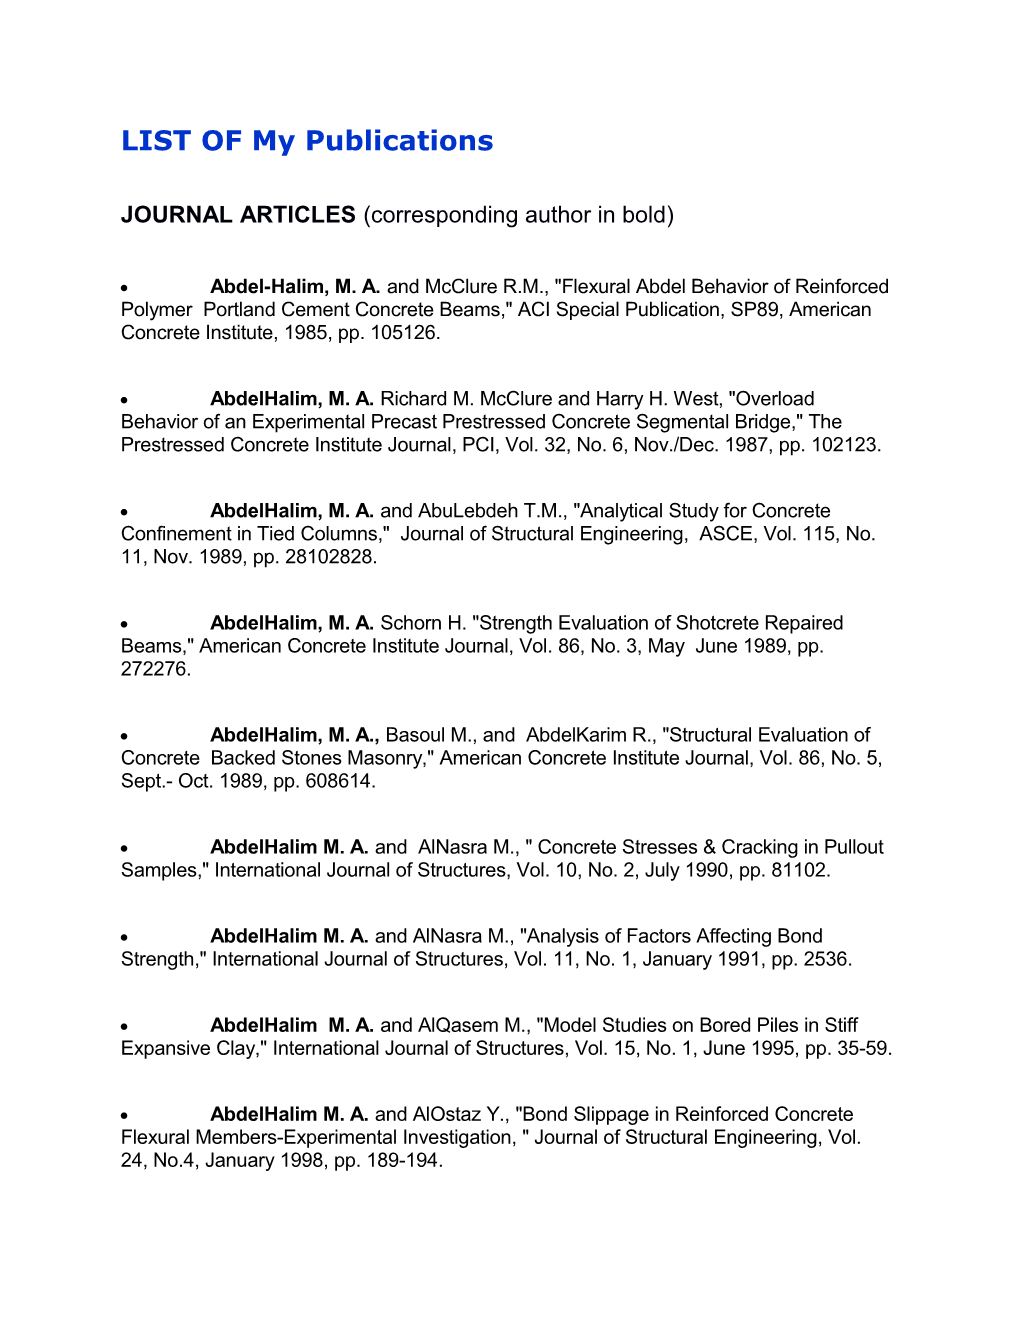 JOURNAL ARTICLES (Corresponding Author in Bold)